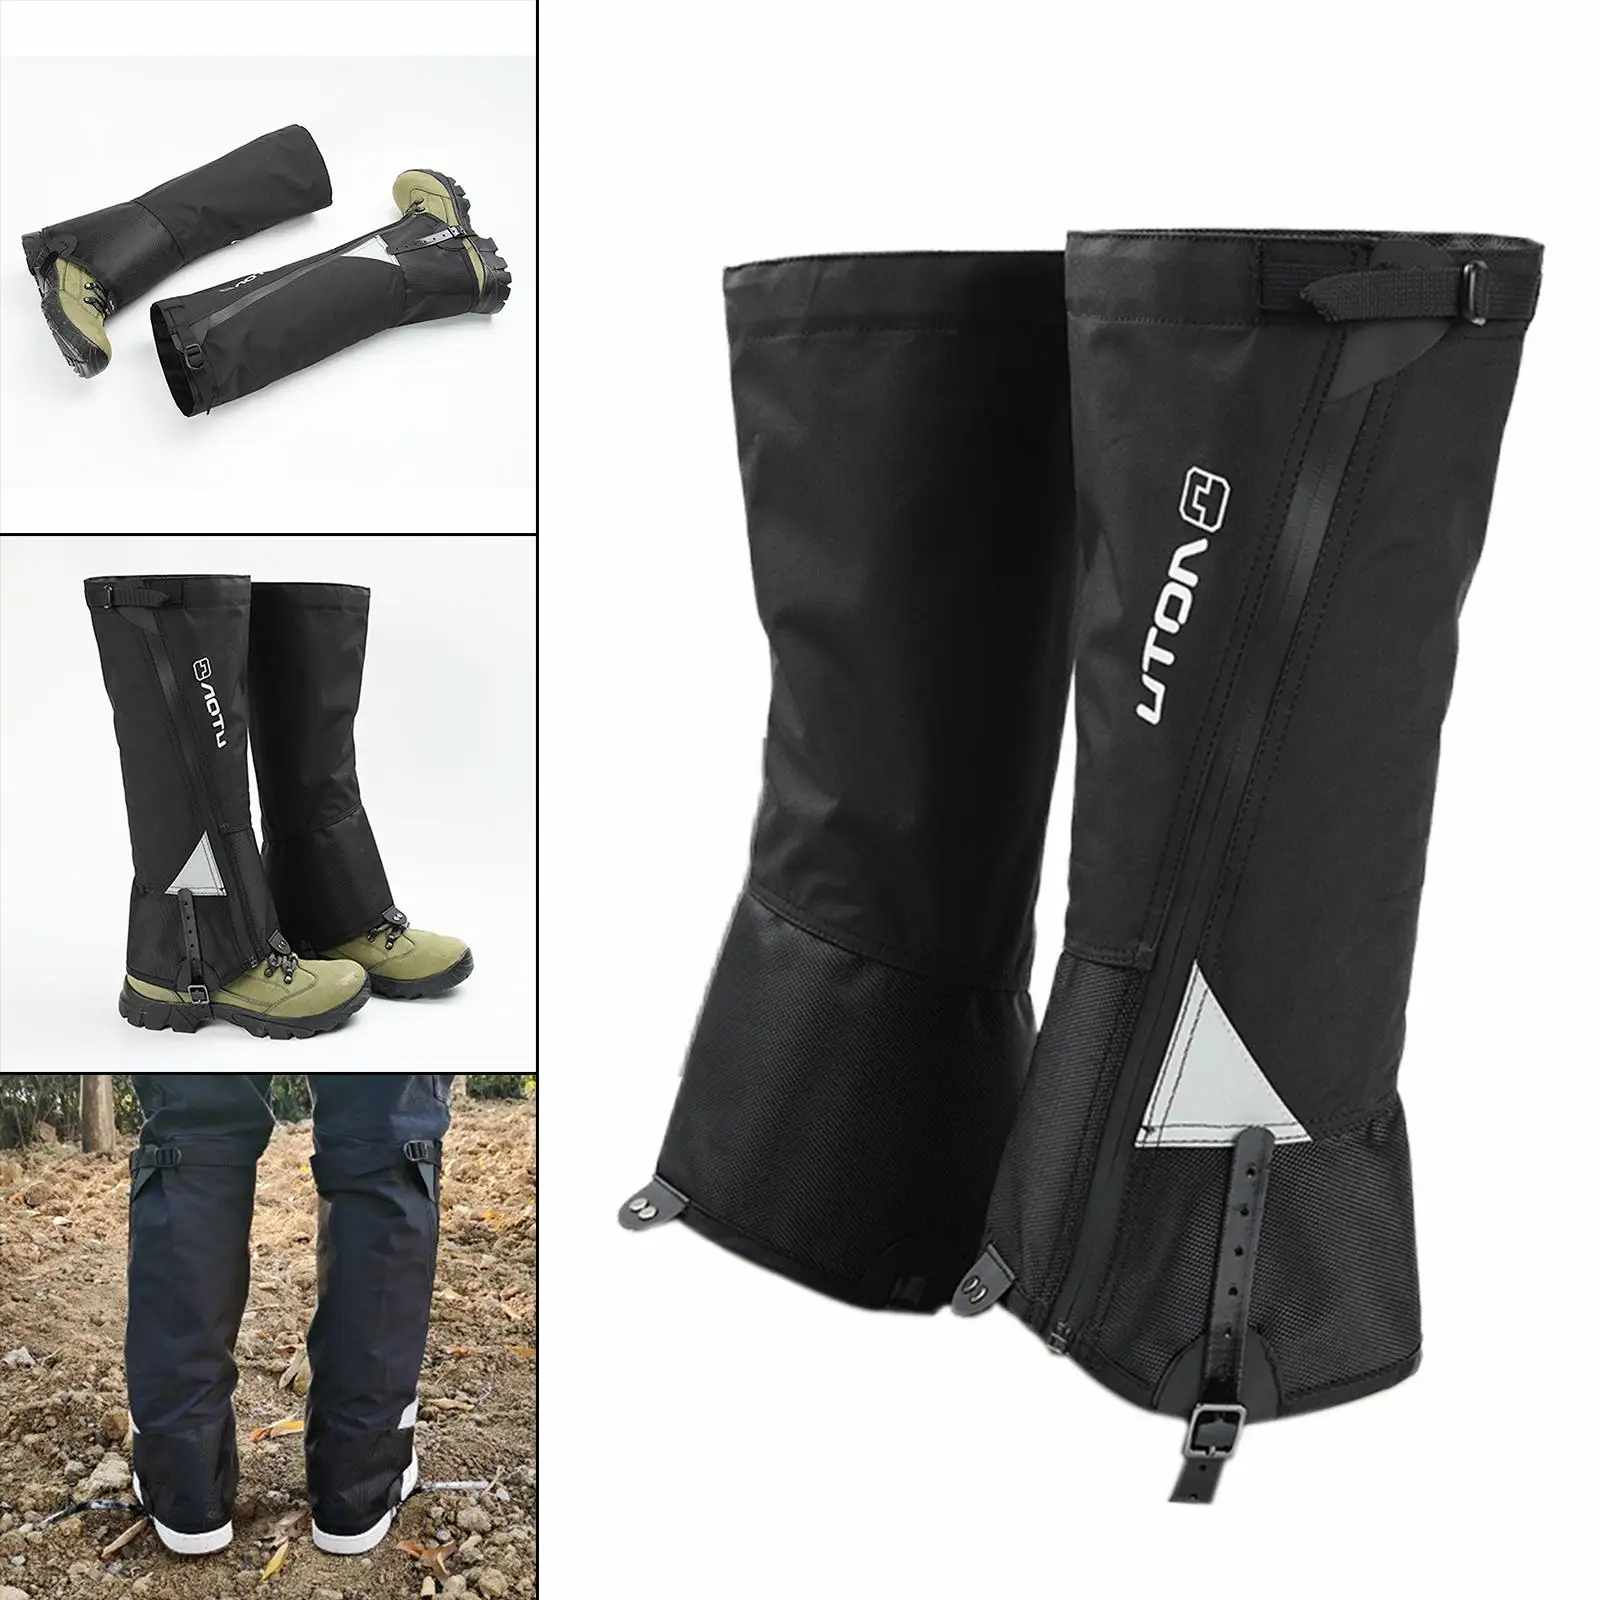 Leg s Waterproof Lightweight  Reflective Strips Boots Shoe  Anti Tear Cover for Camping Hunting Hiking Walking Climbing